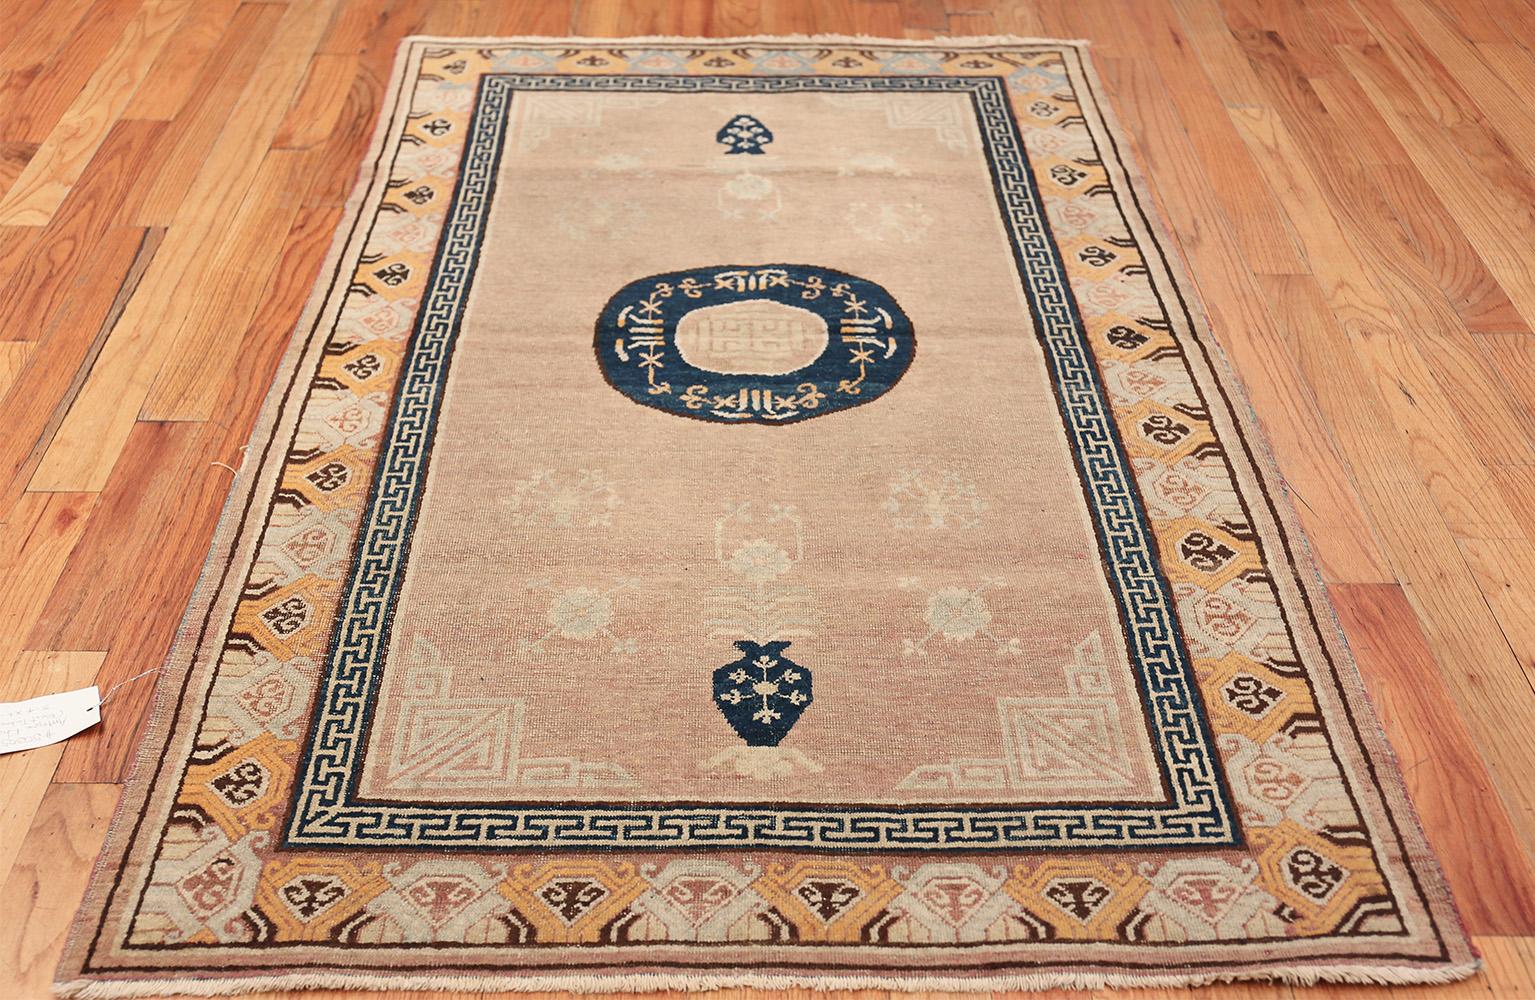 Antique Khotan rug, country of origin: East Turkestan, circa 1900. Showcasing delicate shades of sepia and cream, this Khotan carpet stands out for its skillful use of beautifully detailed borders. The work features interlocking Greek key designs in